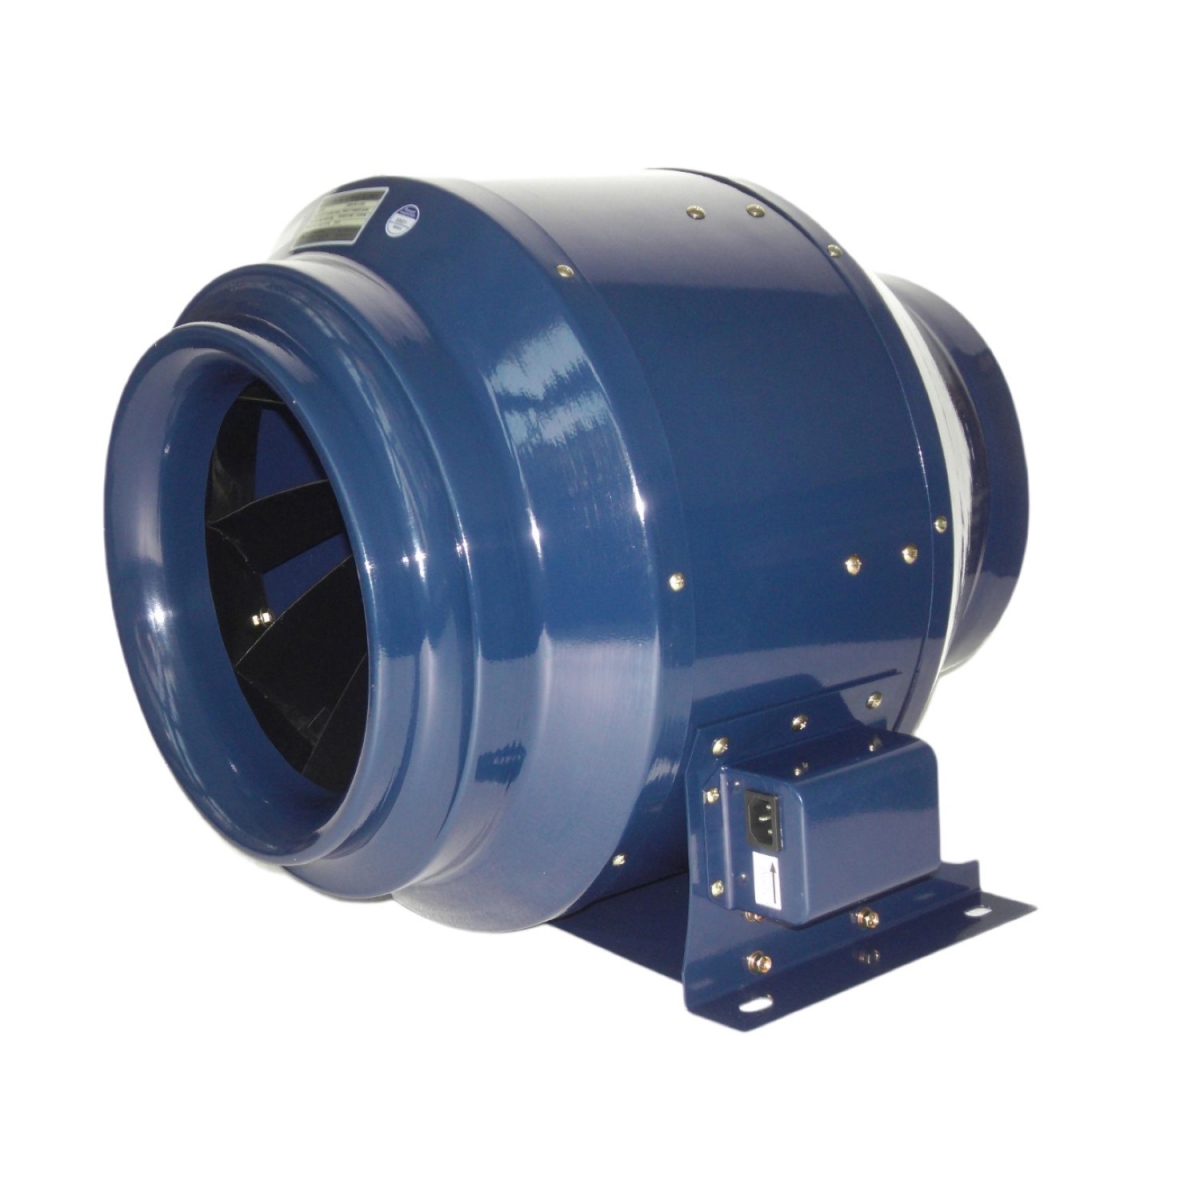 HYDROPONIC METAL BLADE CENTRIFUGAL fan INLINE EASY INSTALLATION CARBON FILTER Manufacturer in China.-SUNLIGHT BLOWER,Centrifugal Fans, Inline Fans,Motors,Backward curved centrifugal fans ,Forward curved centrifugal fans ,inlet fans, EC fans